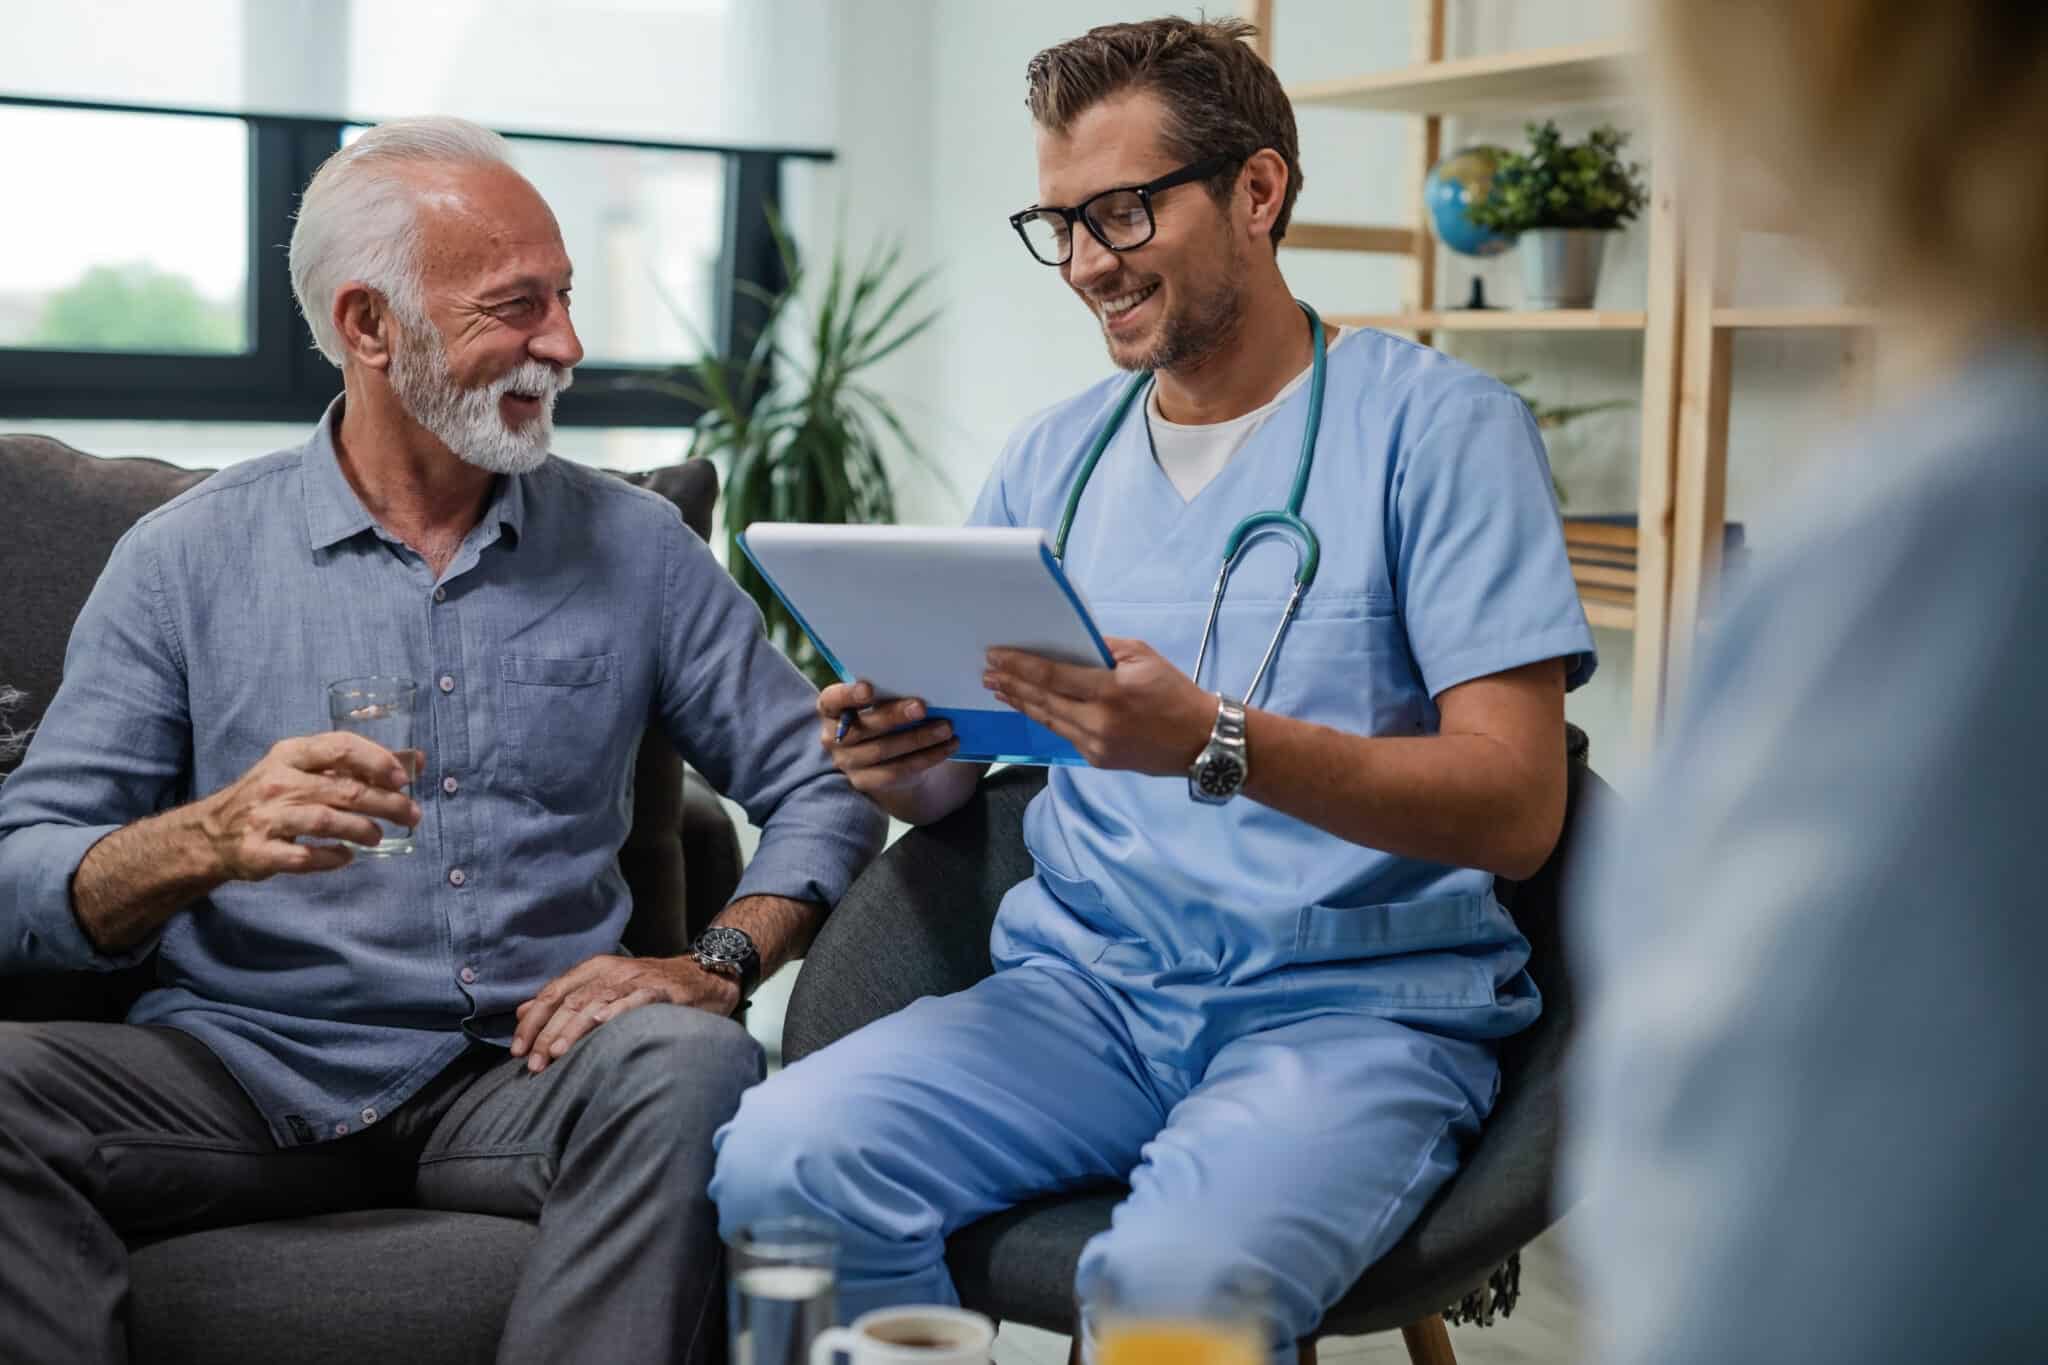 Learn how medical scribes are revolutionizing healthcare, spurring enhanced patient outcomes. Athreon's AxiScribe medical scribing service optimizes results!